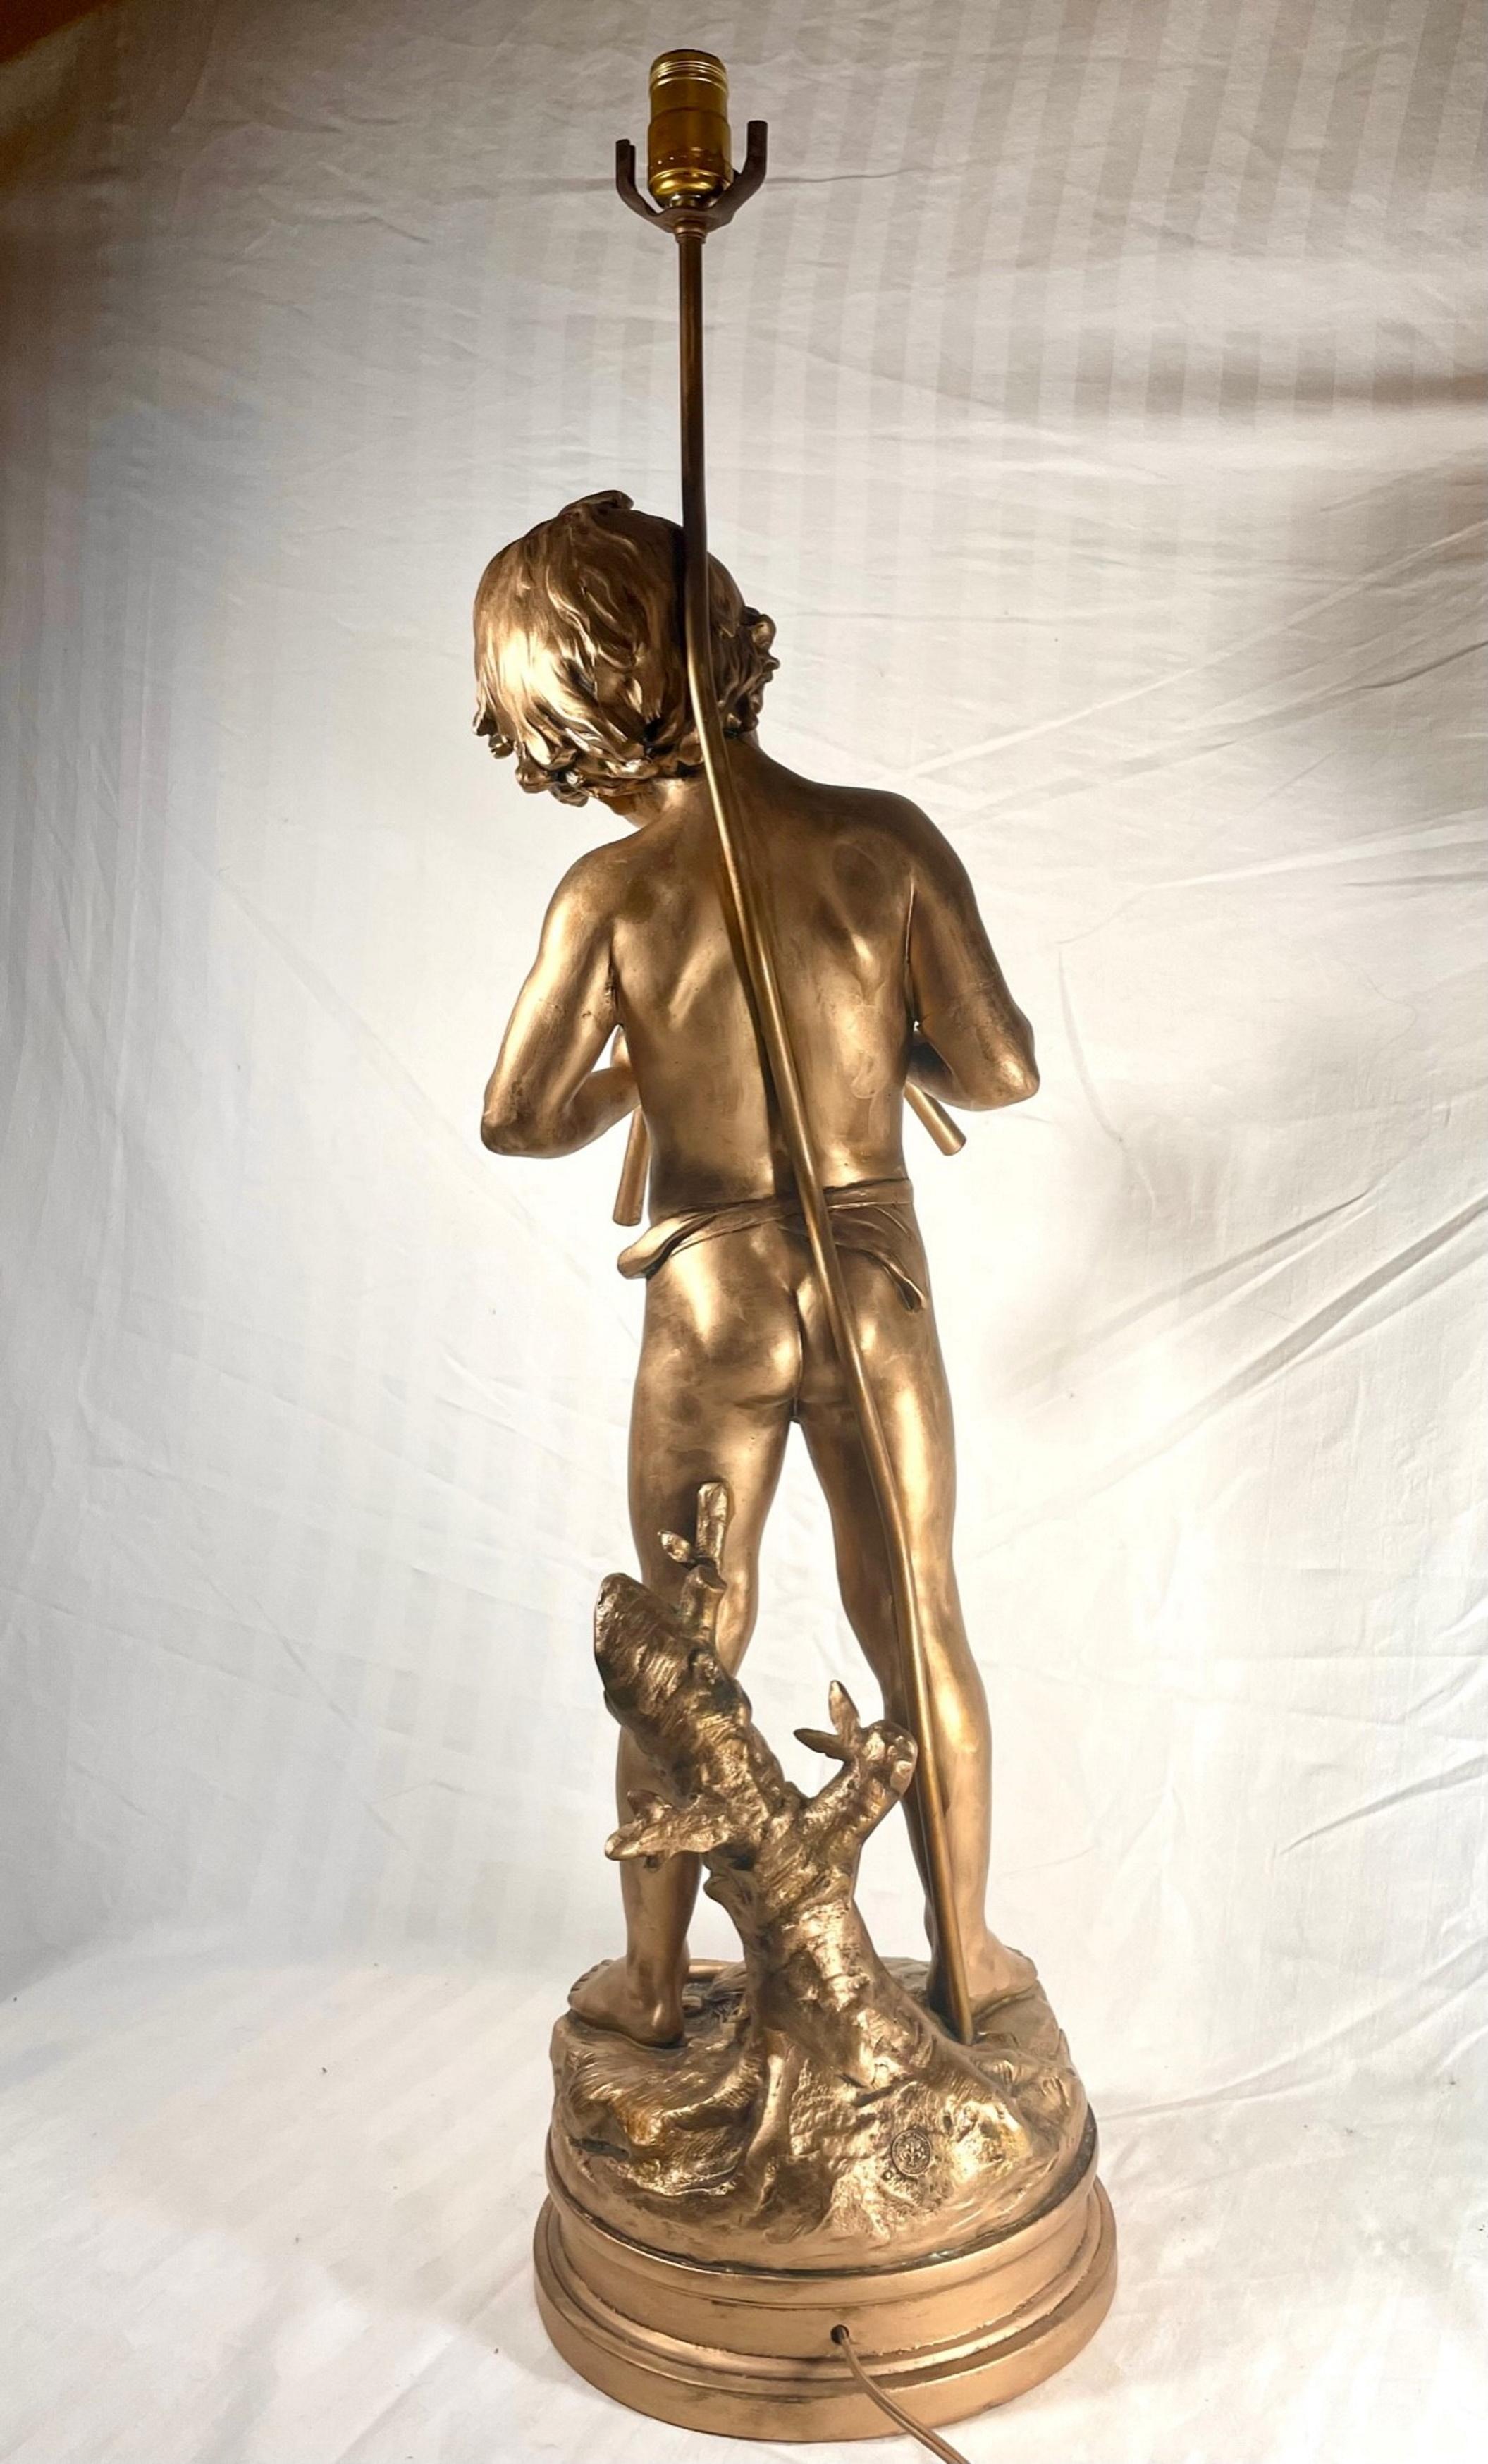 19th Century French Gilt Bronzed Lamp Sculpture “Boy with Flute”, Signed Moreau. For Sale 2